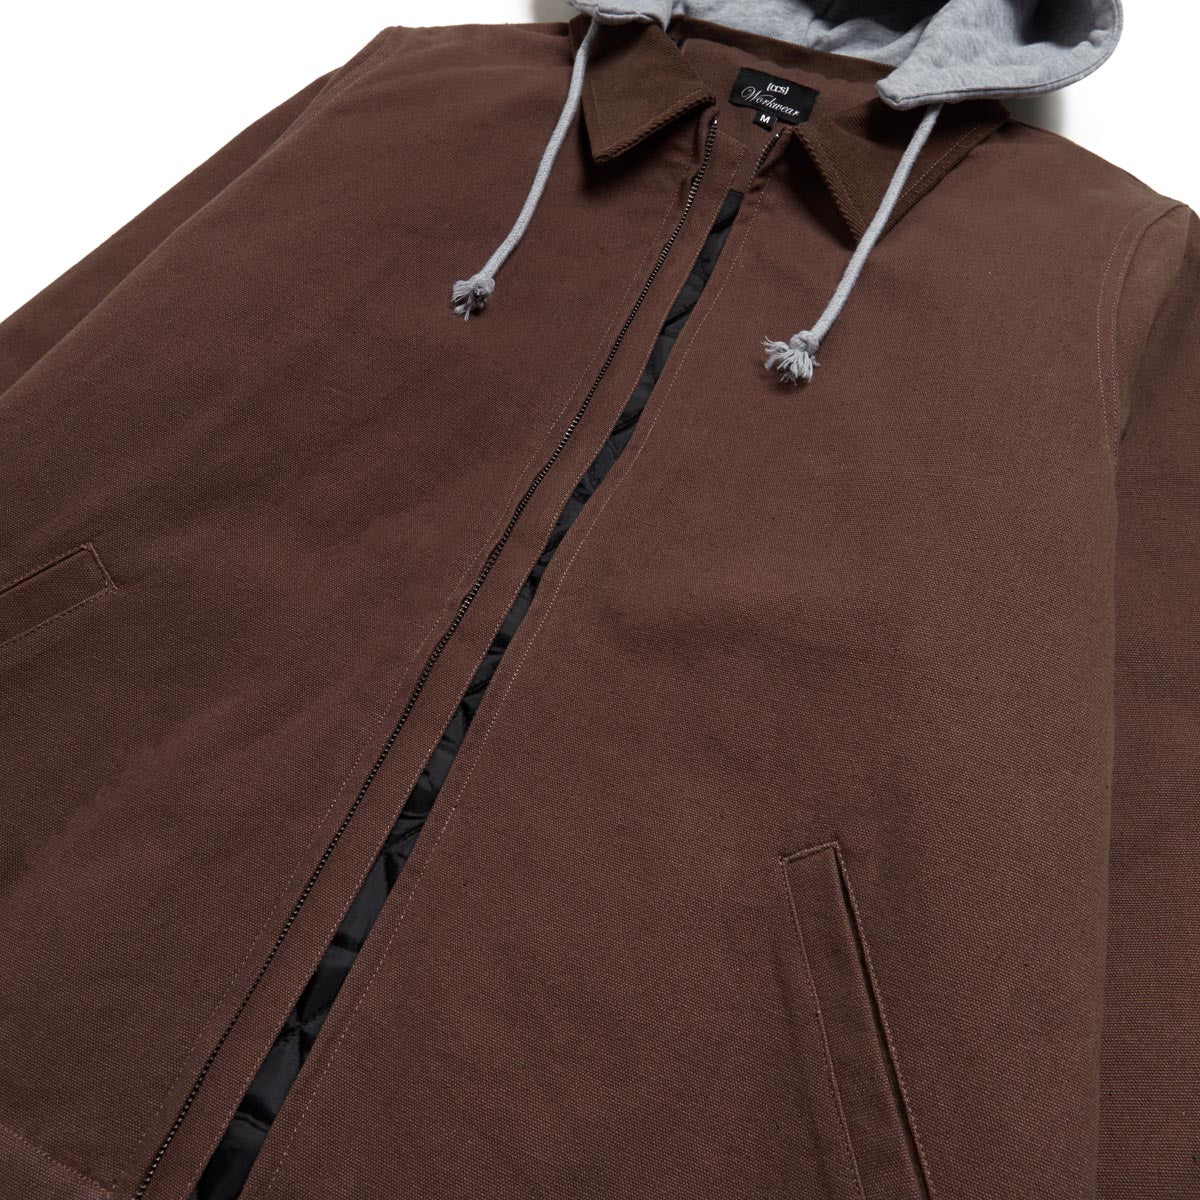 CCS Heavy Canvas Insulated Work Jacket - Brown image 7